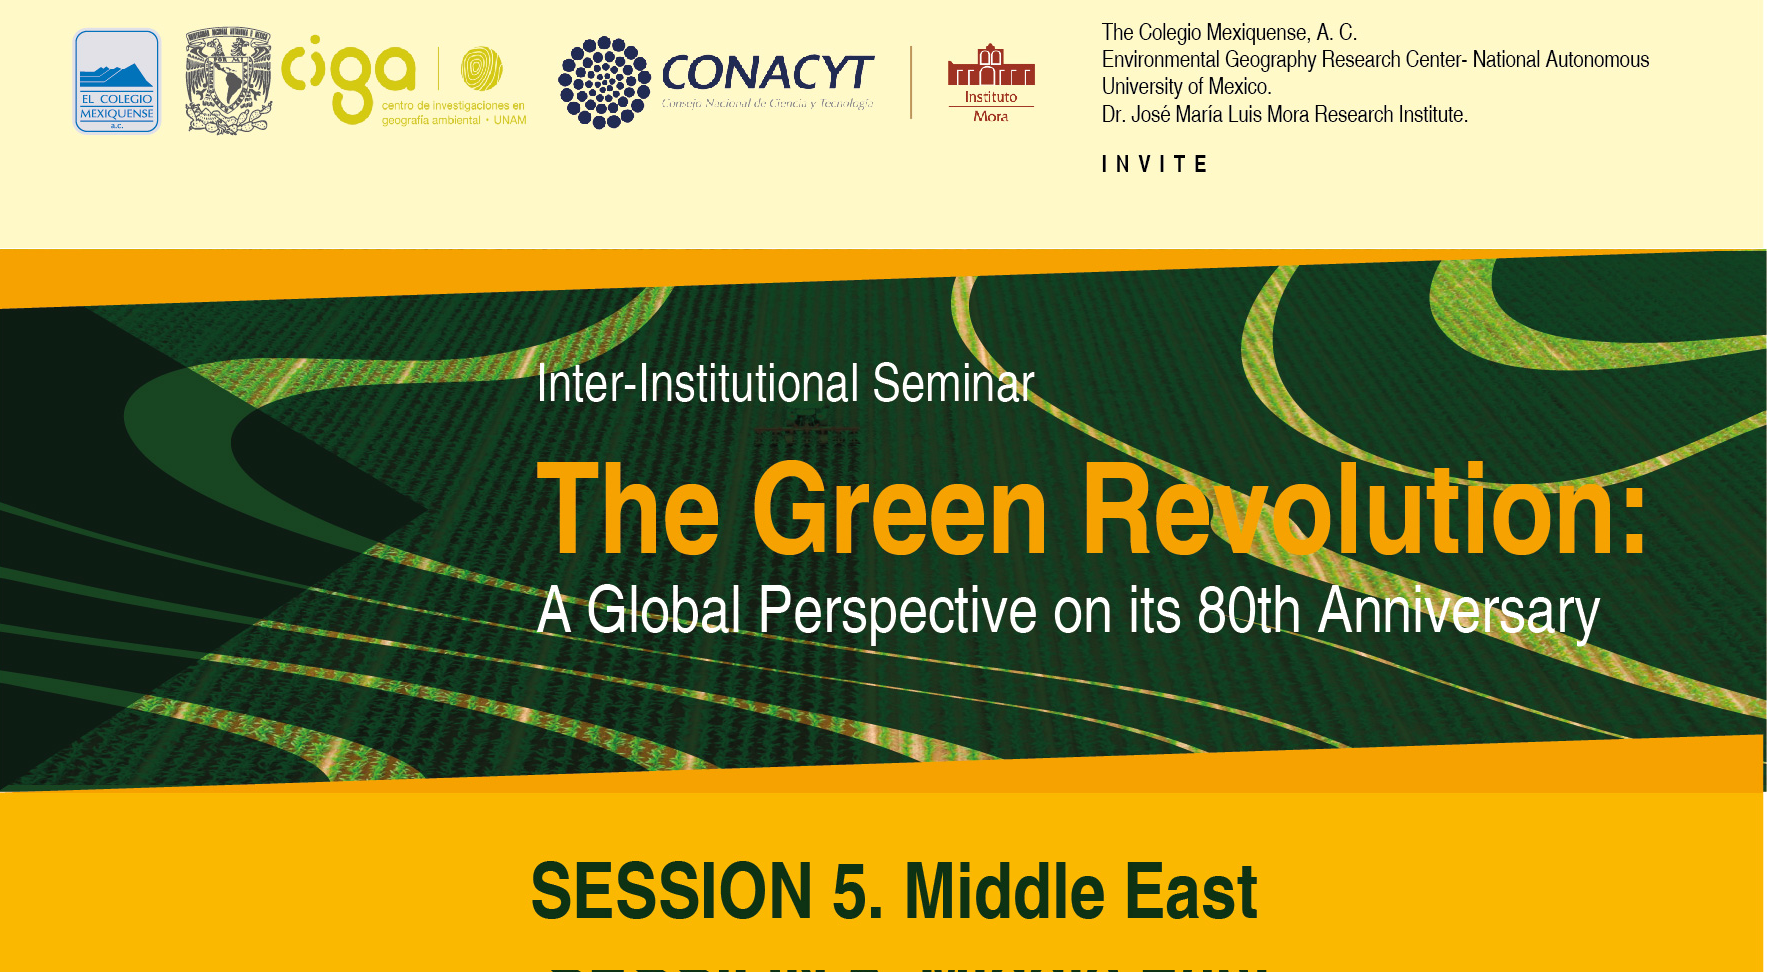 Session 5. Middle East. The Green Revolution: A Global Perspective on its 80th Anniversary